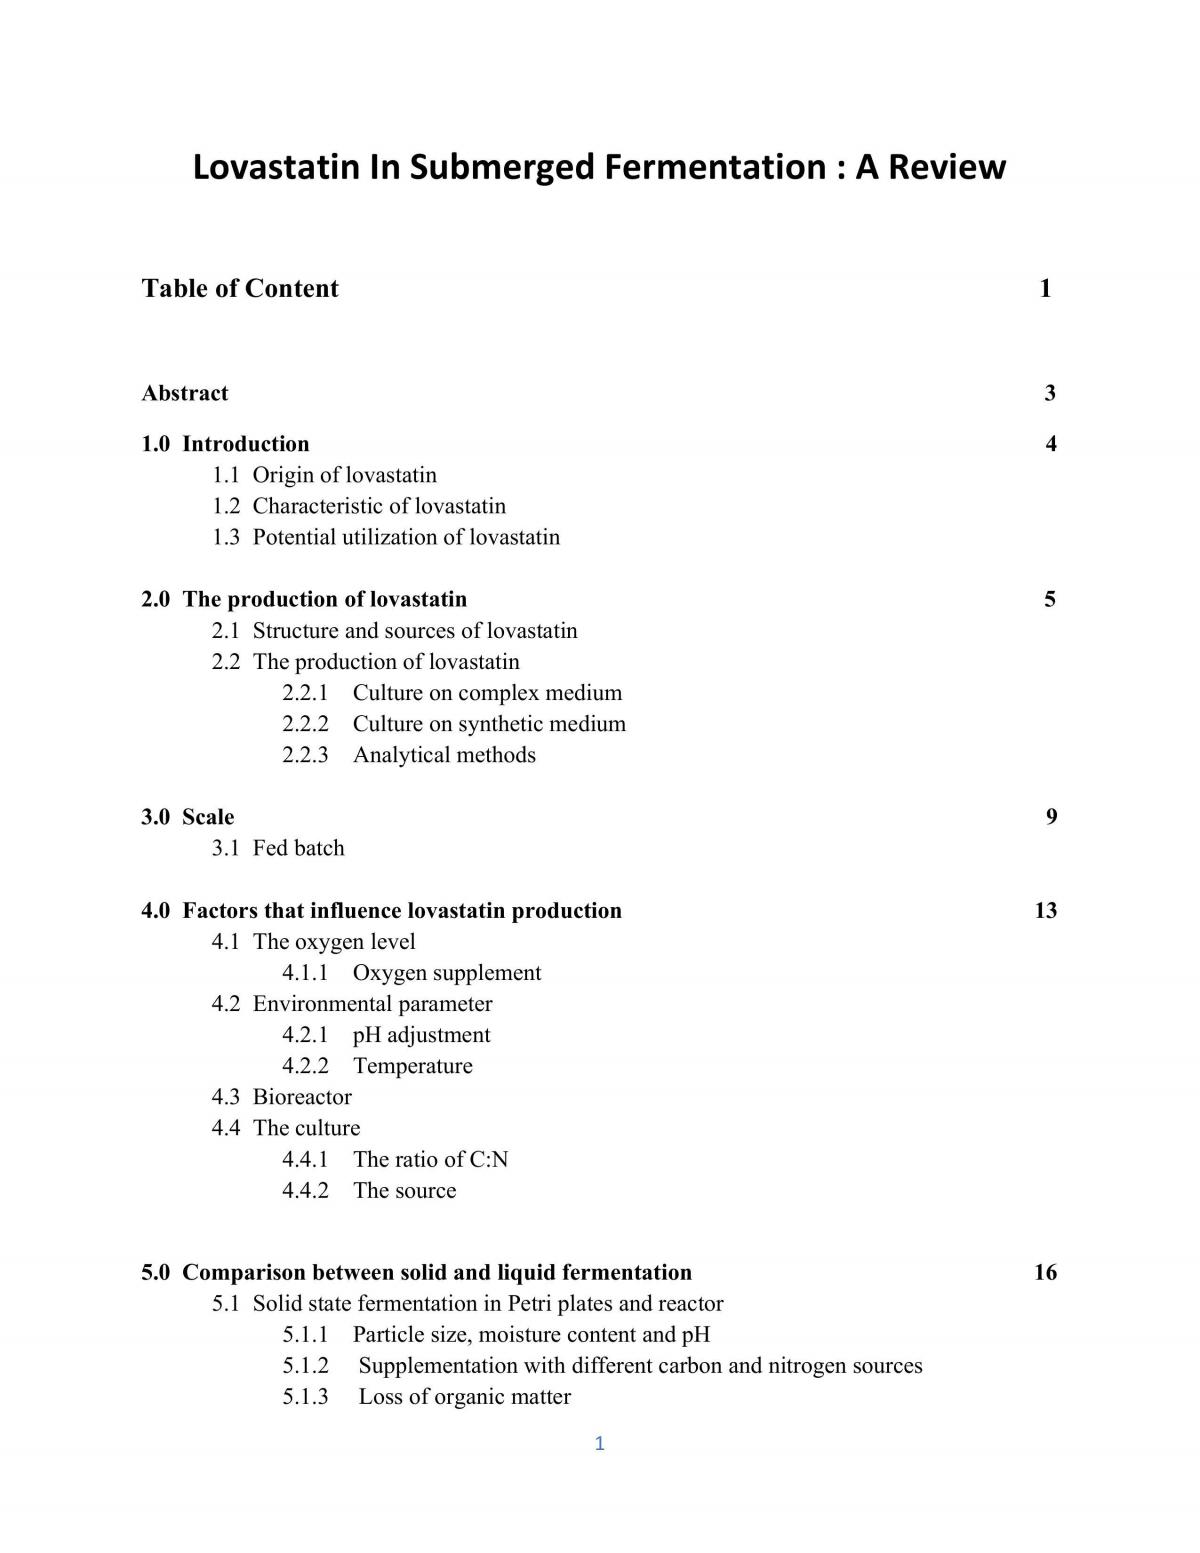 Lovastatin in Submerged Fermentation - A Review - Page 1